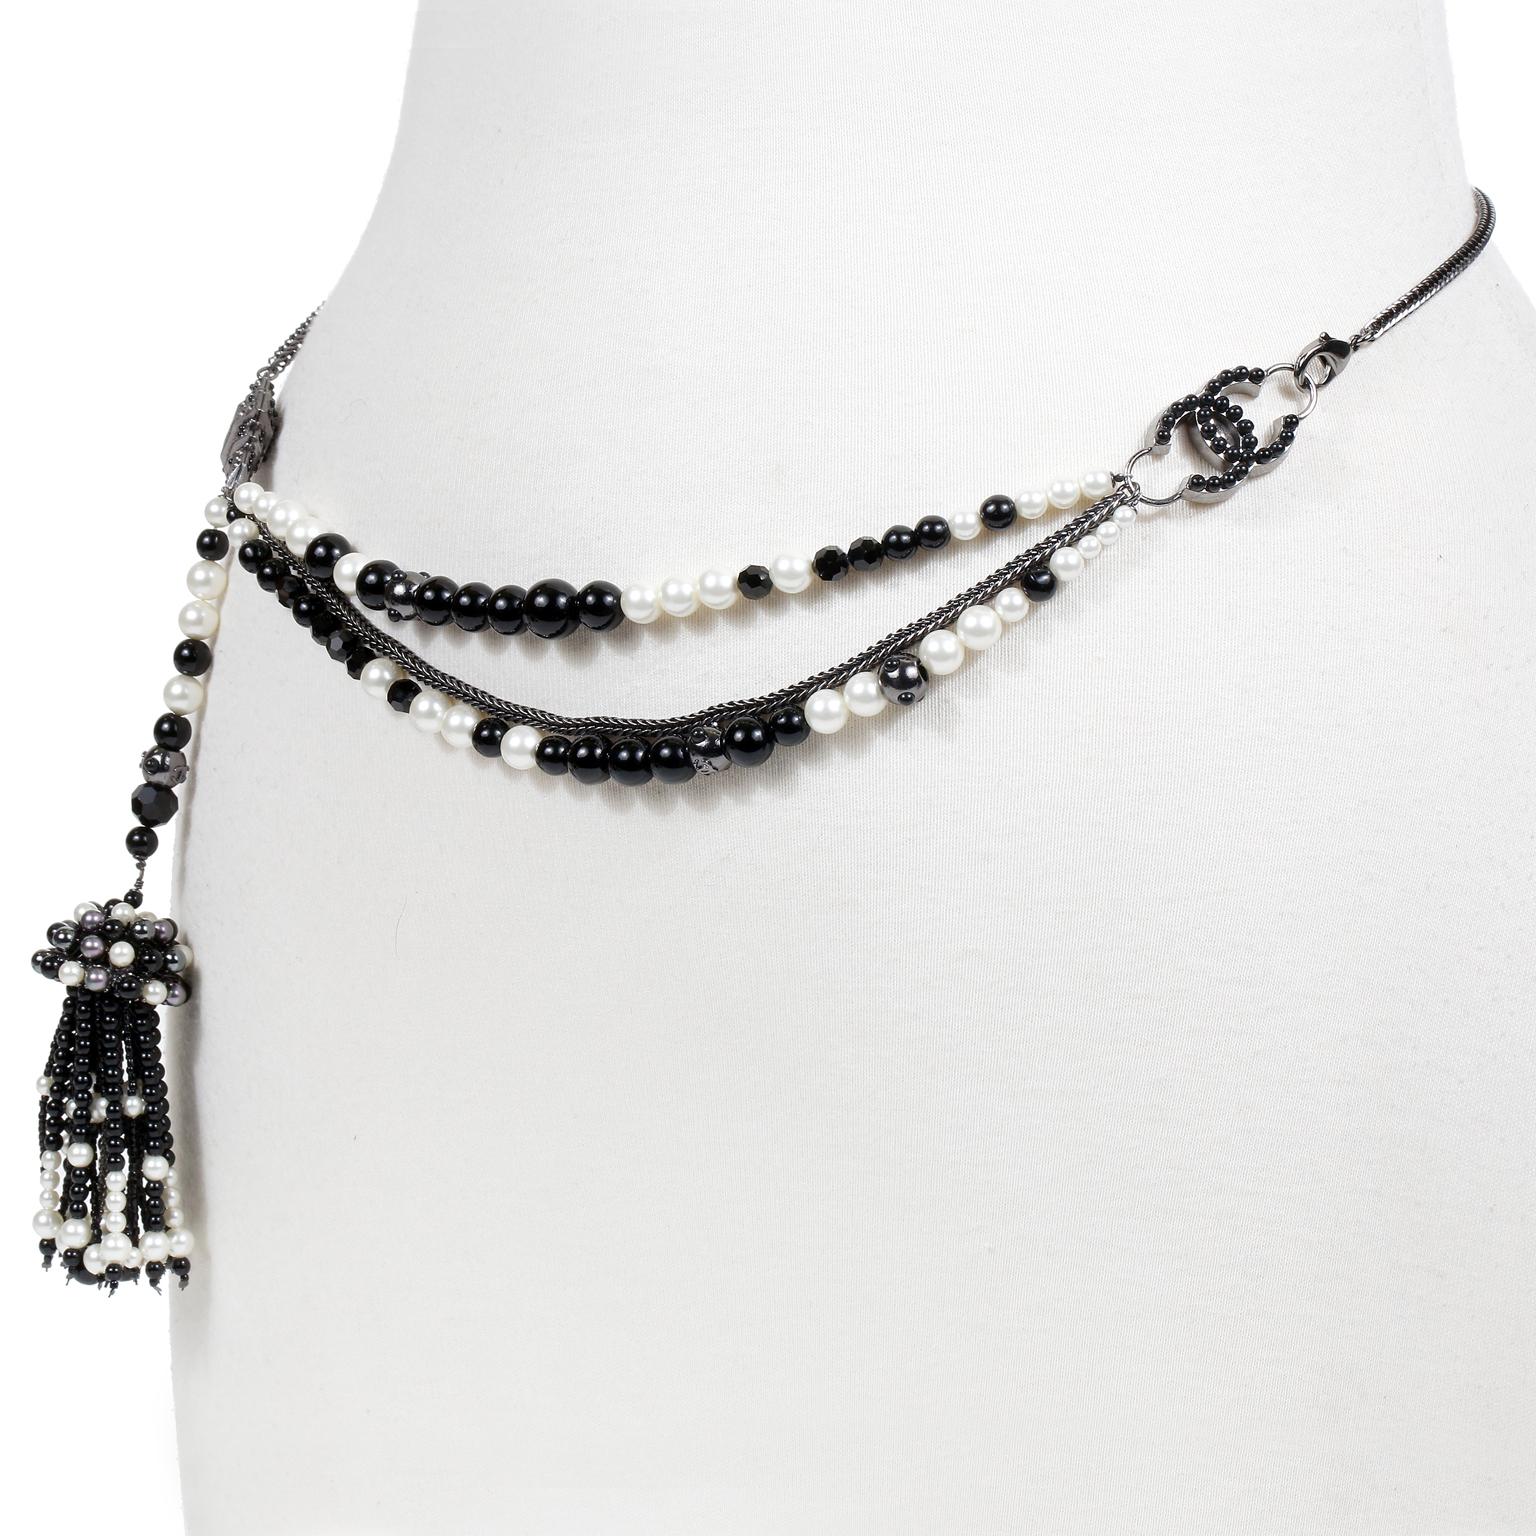 Women's Chanel Black and White Pearl Tassel Belt Necklace